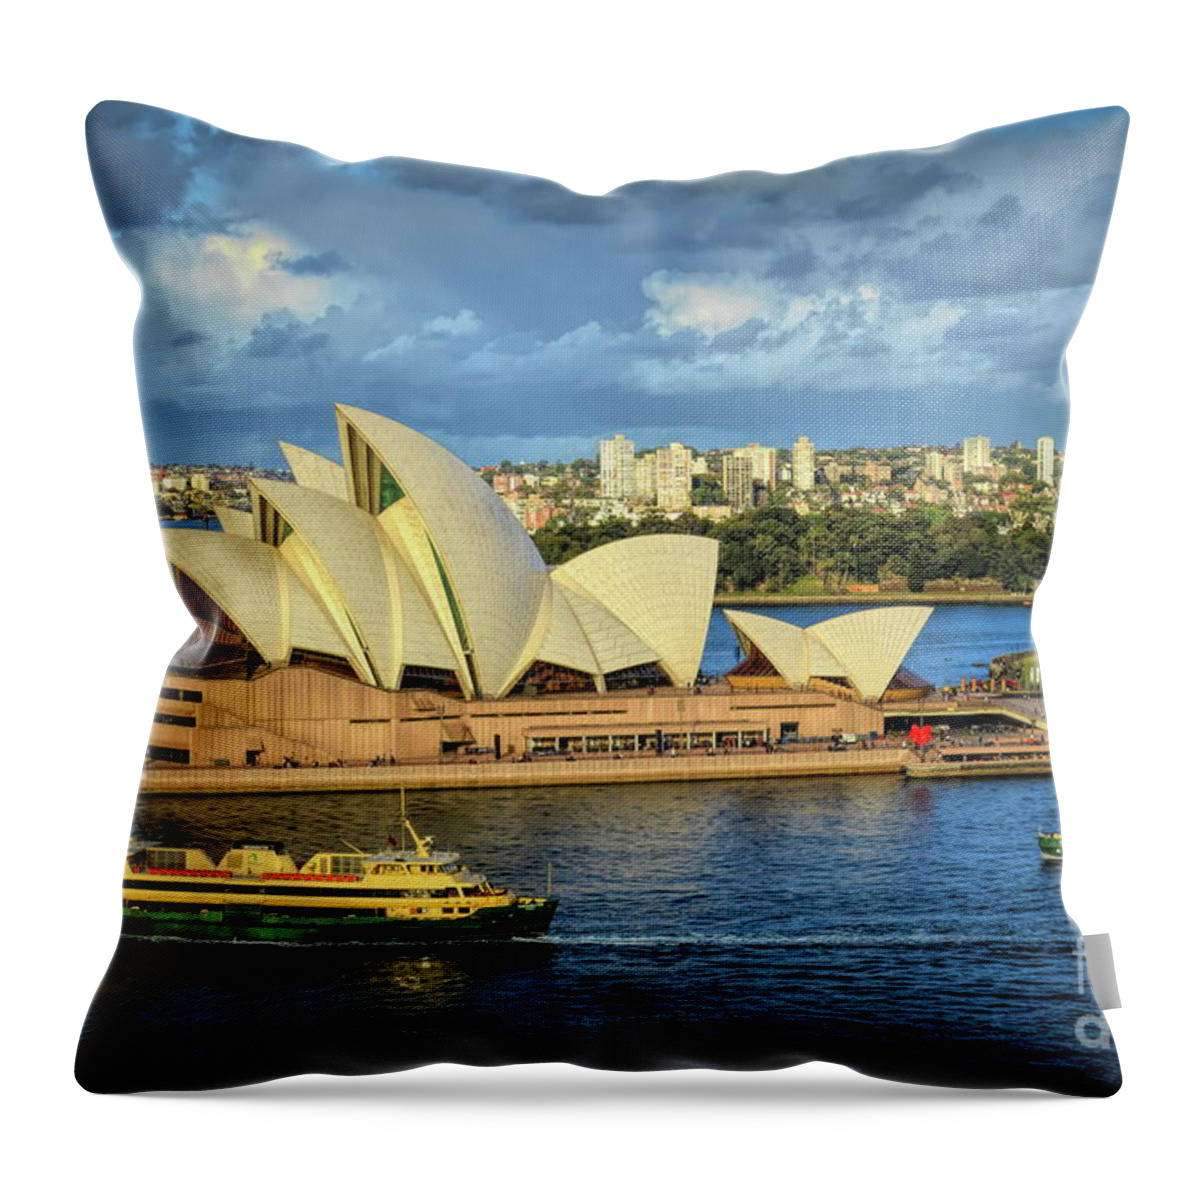 Cityscape Throw Pillow featuring the photograph Sydney Opera House Australia by Diana Mary Sharpton